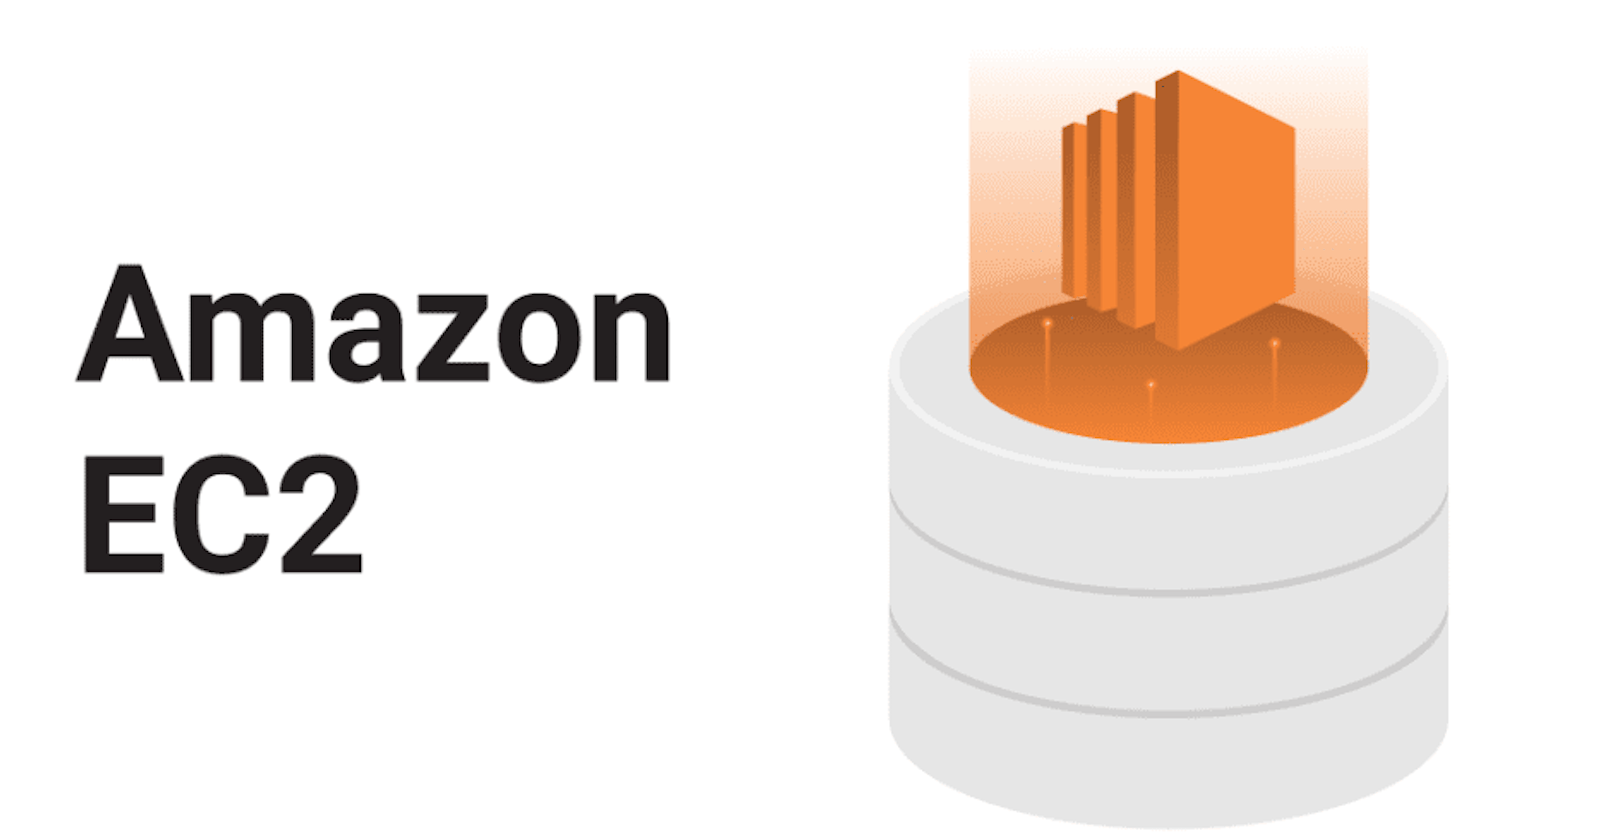 How to Launch the sever in AWS with Default Parameters